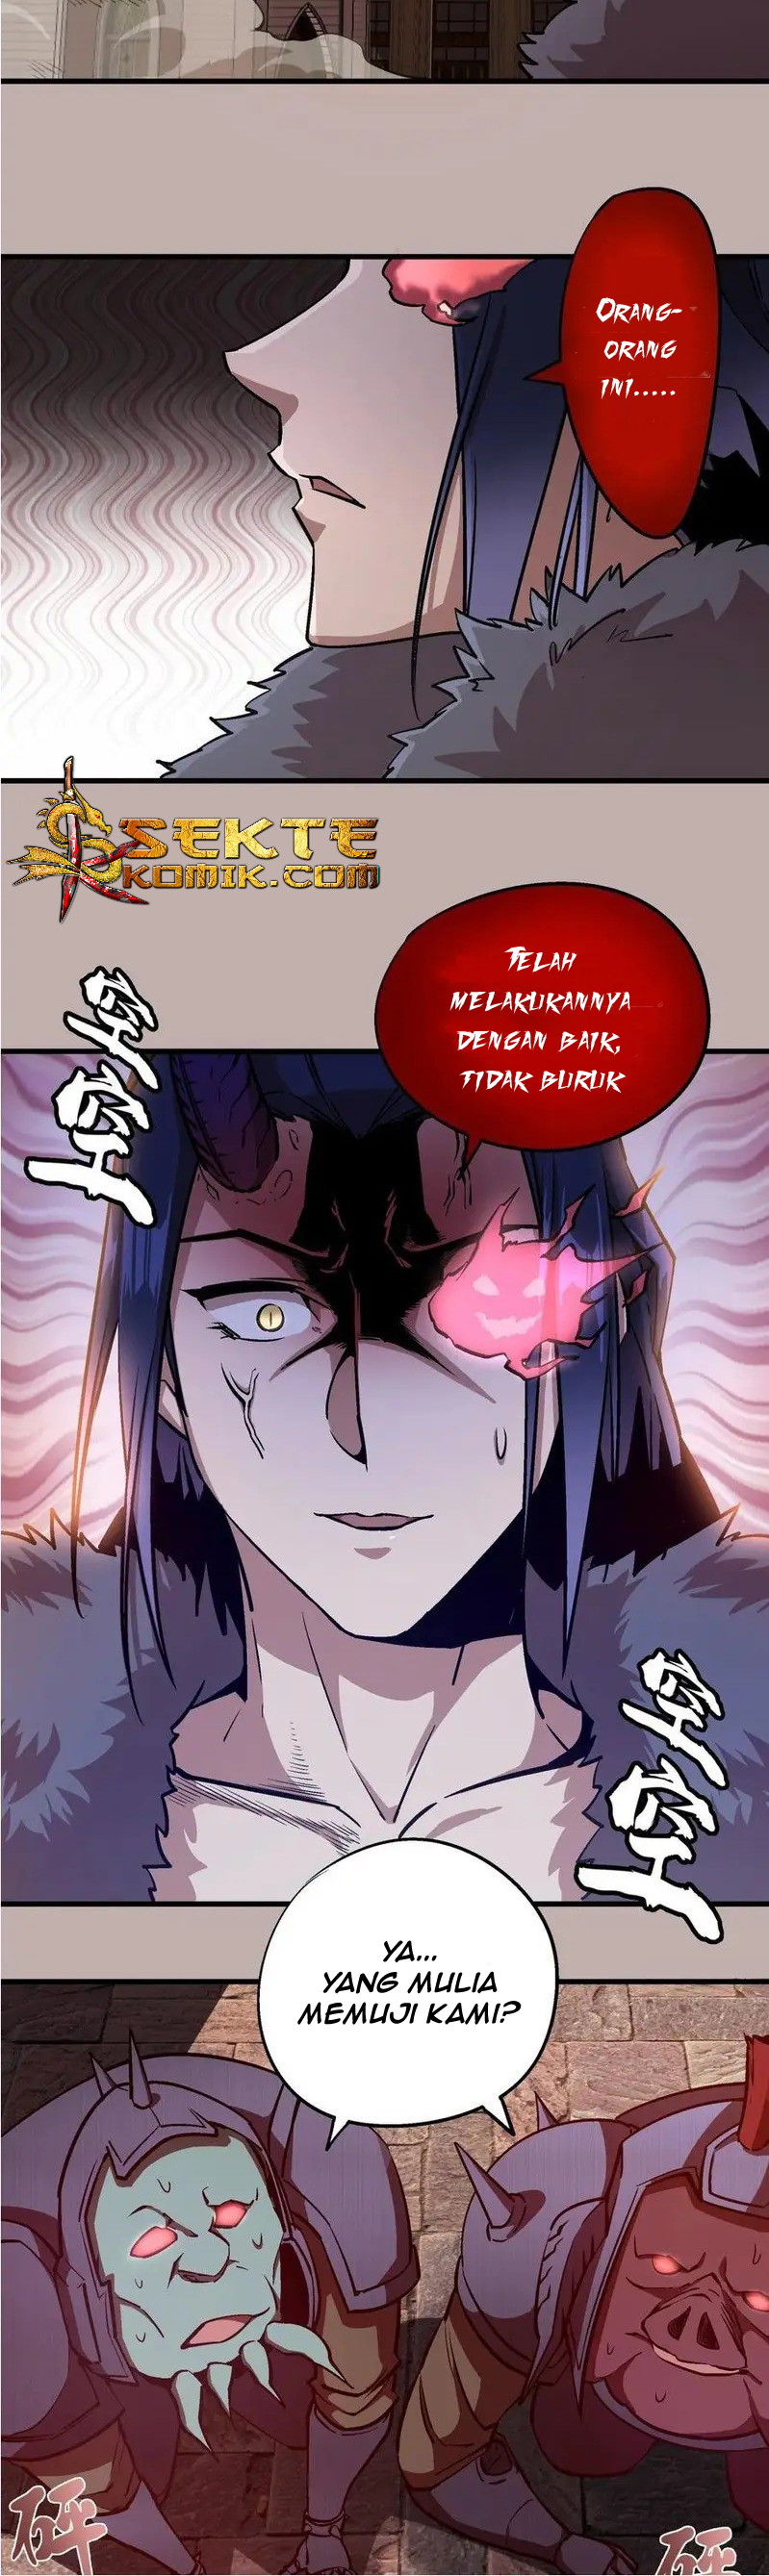 I’m Not The Overlord Chapter 2 16